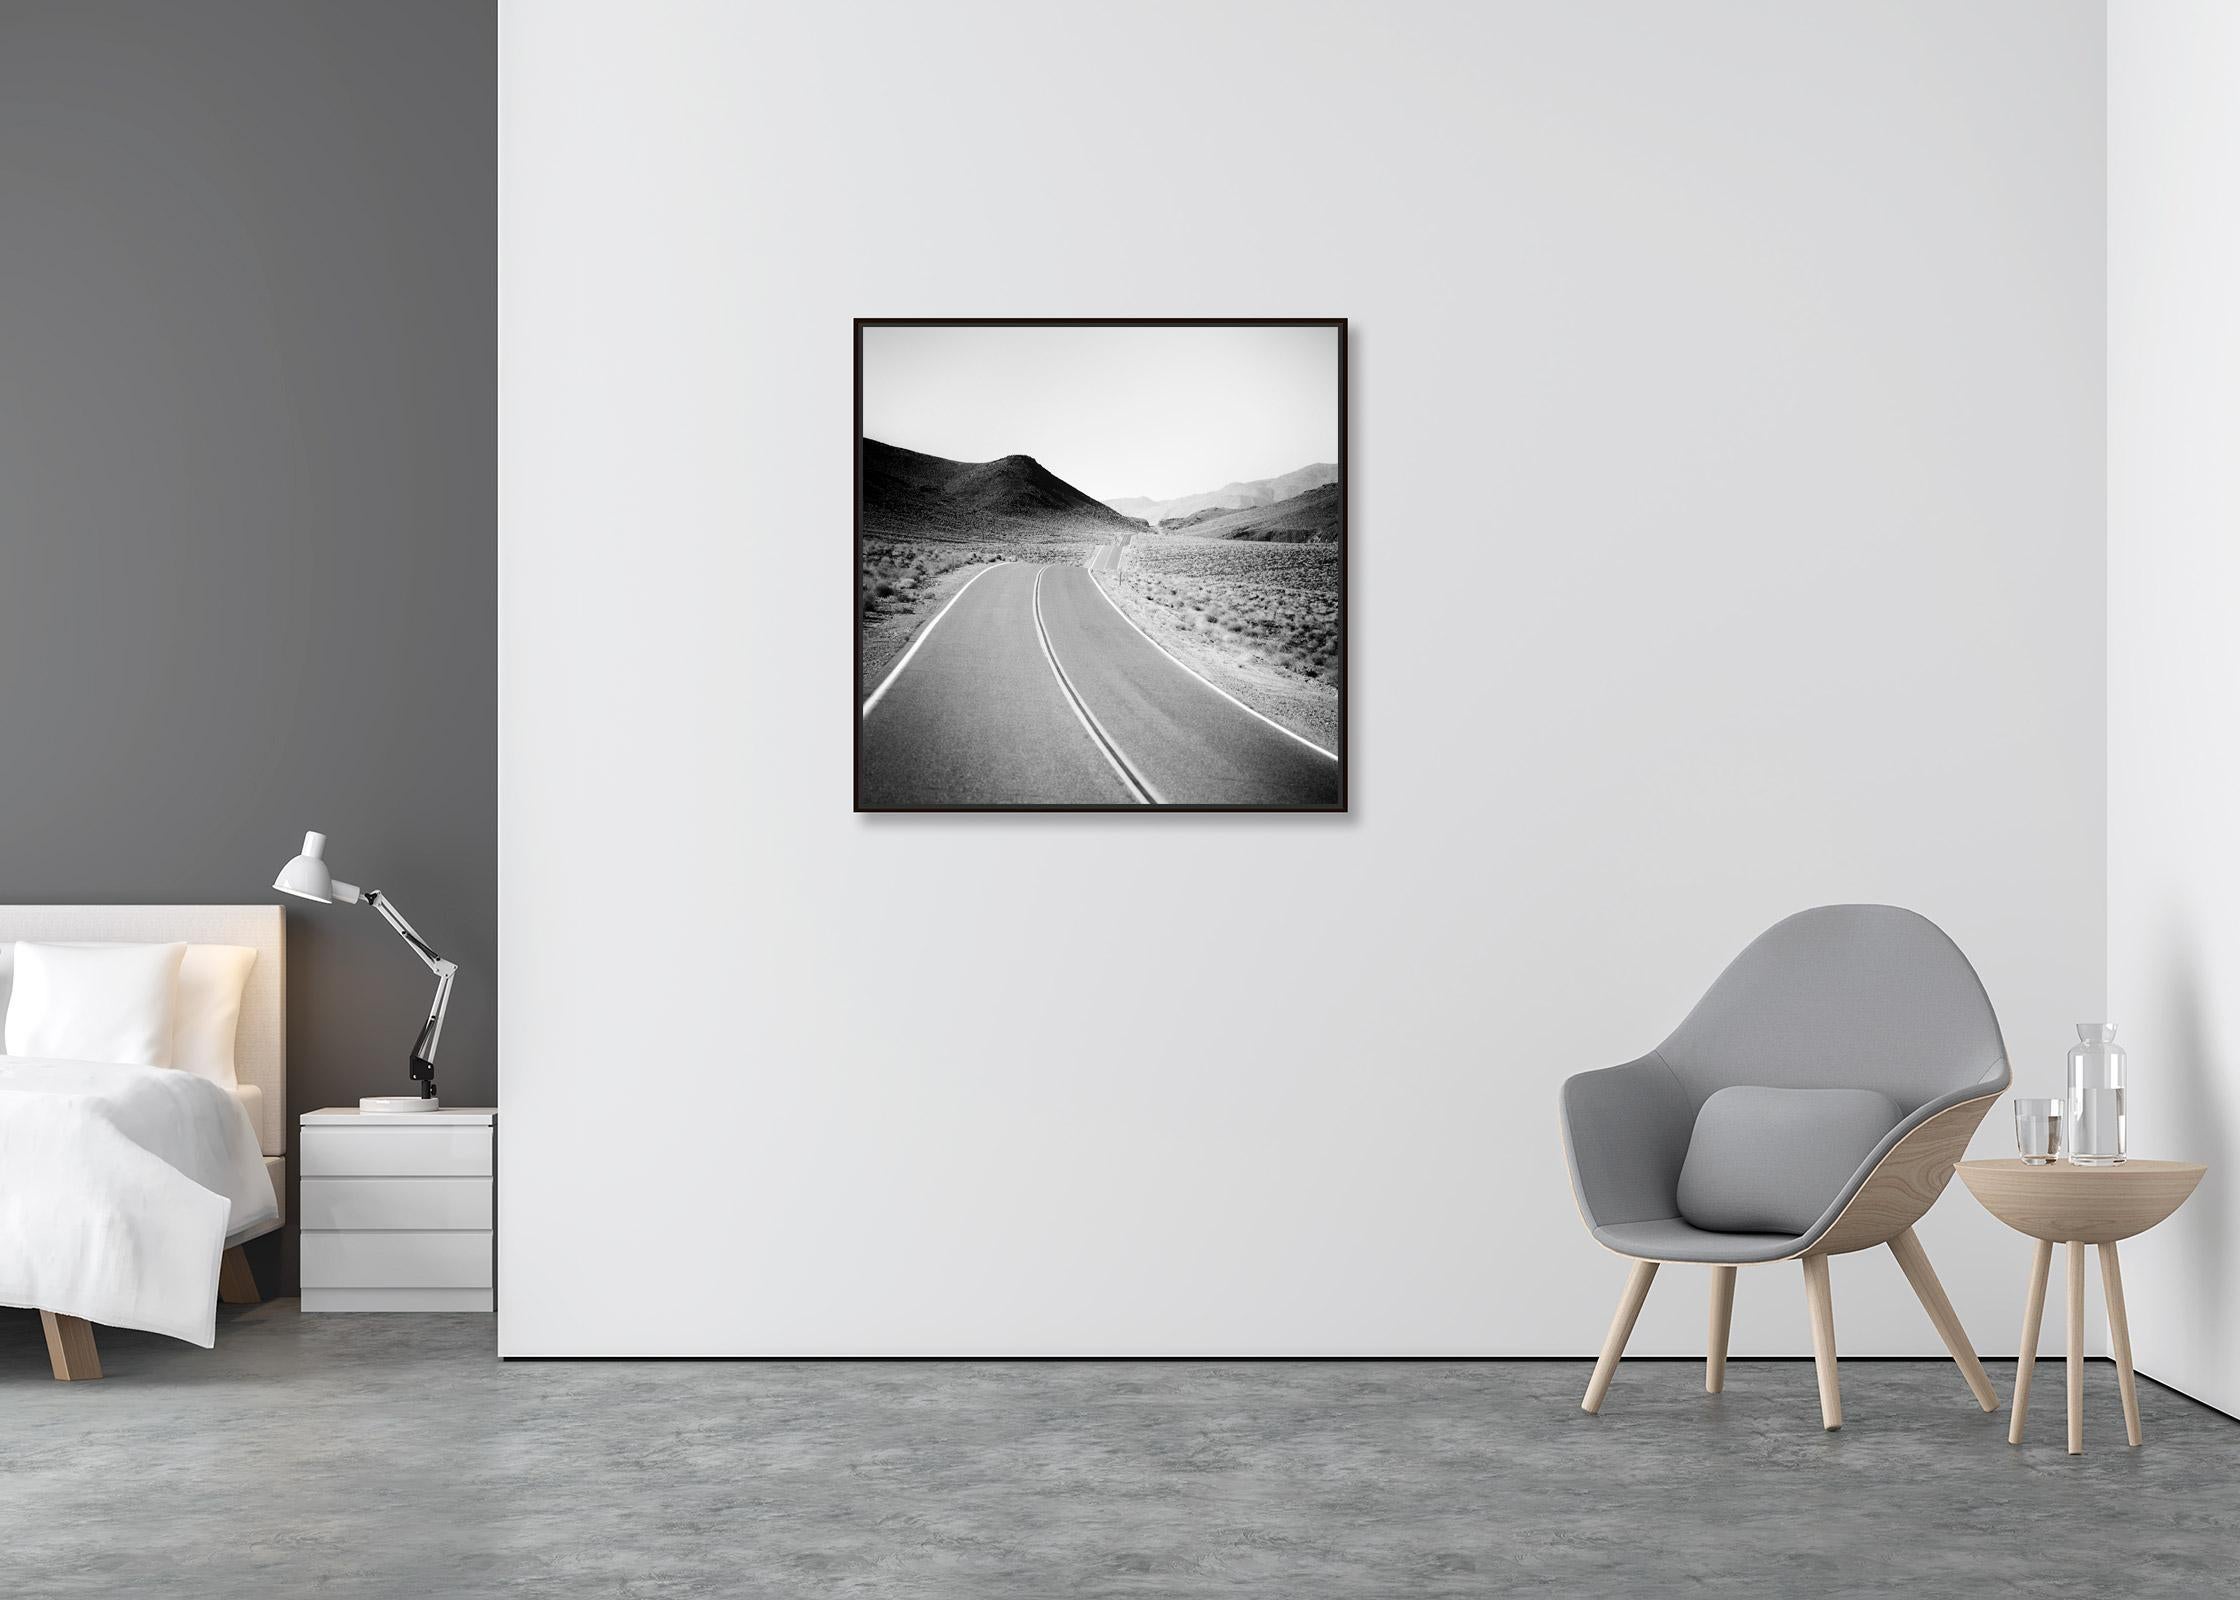 Way to Nowhere, Route 66, Arizona, USA, black white art landscape photography - Contemporary Photograph by Gerald Berghammer